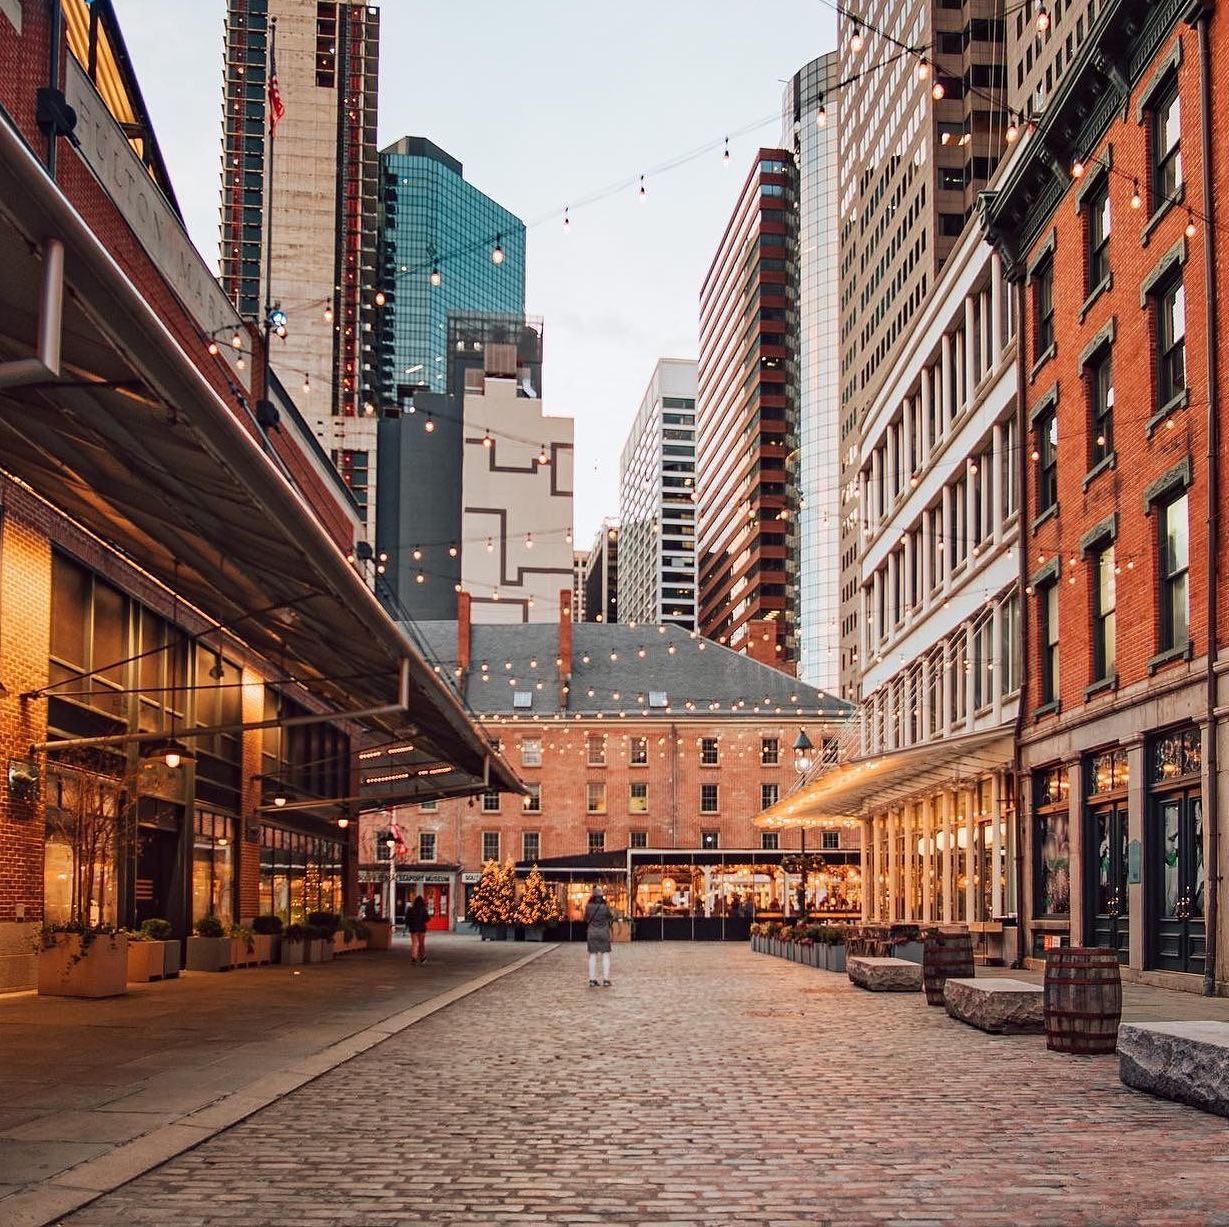 Golden hour on the cobbles. Get Lost. Find New York. #TheSeaport  @thehungrylark